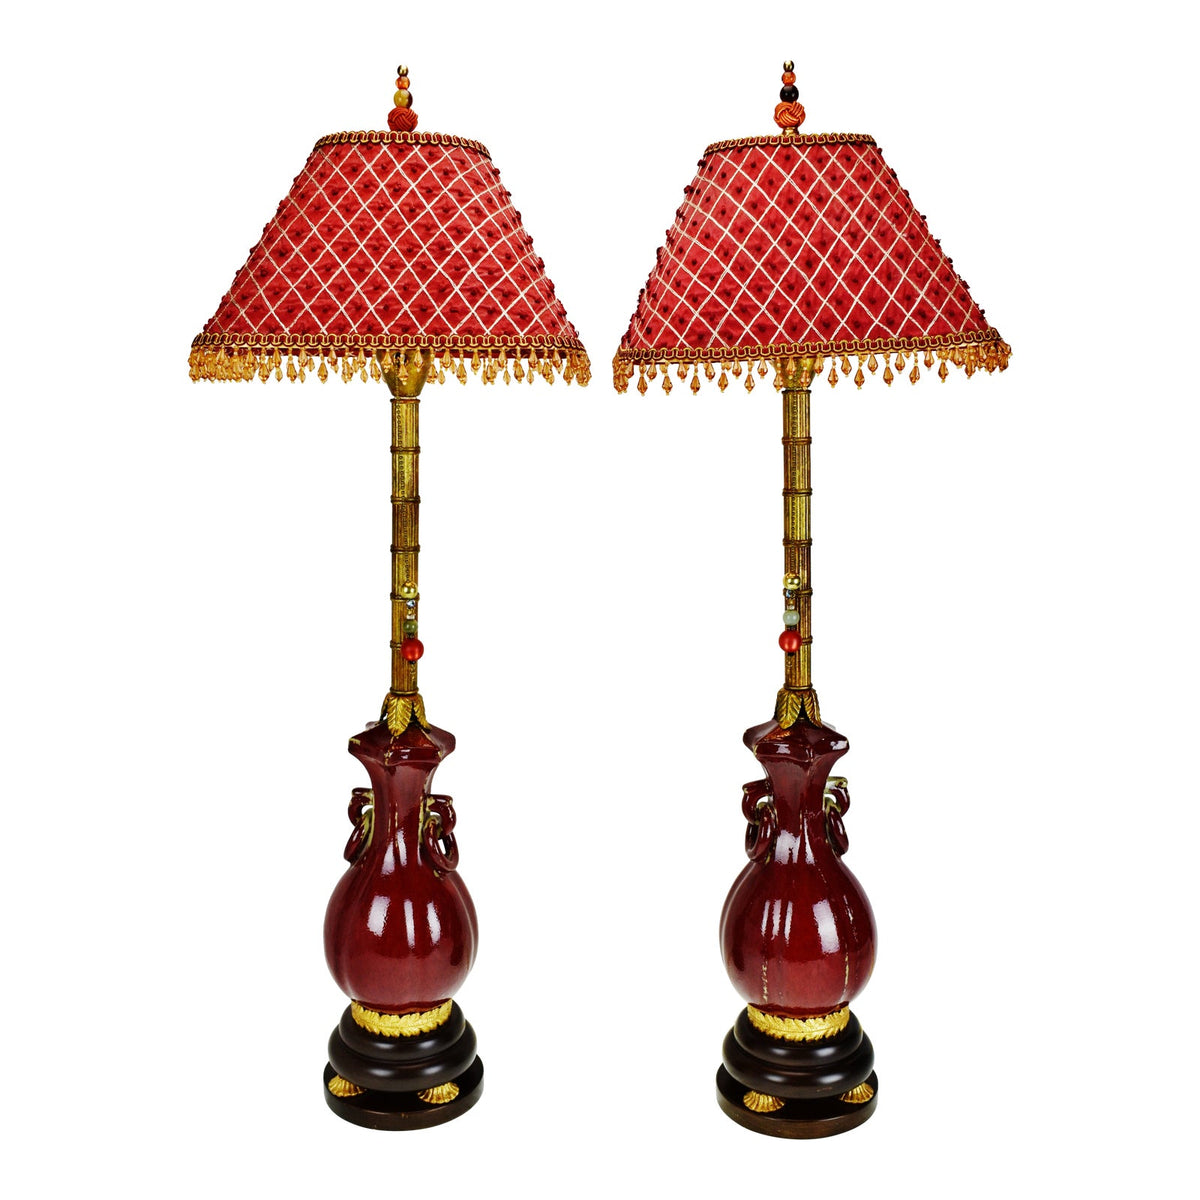 Vintage gold brass table lamp with shade printed with flemish painted  flowers cream, beige, brown, red For Sale on Ruby Lane